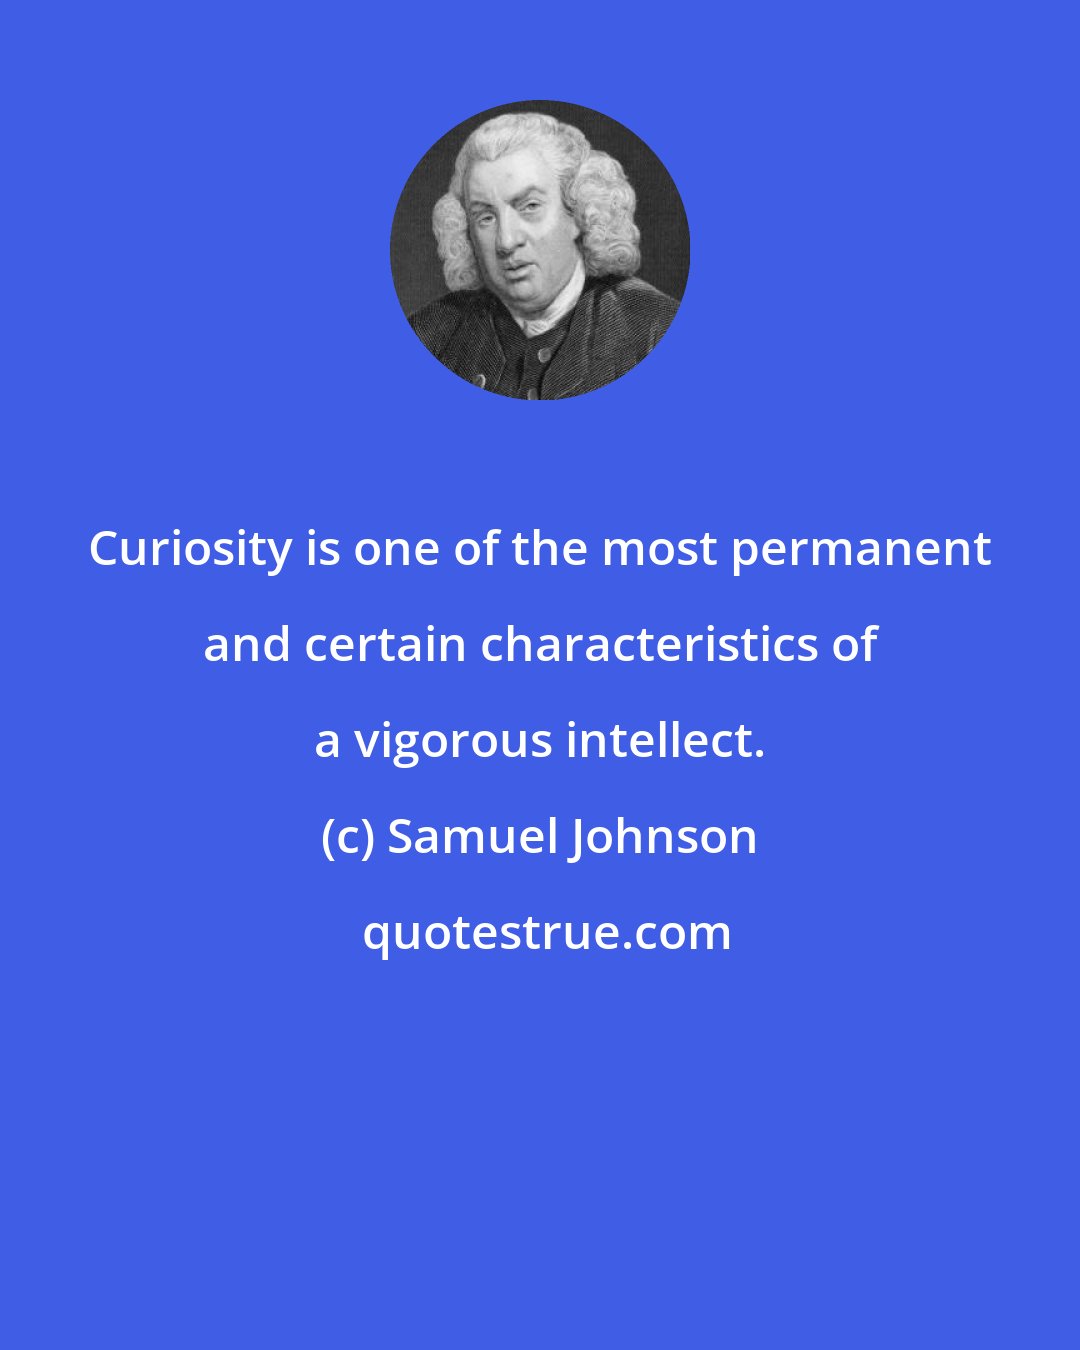 Samuel Johnson: Curiosity is one of the most permanent and certain characteristics of a vigorous intellect.